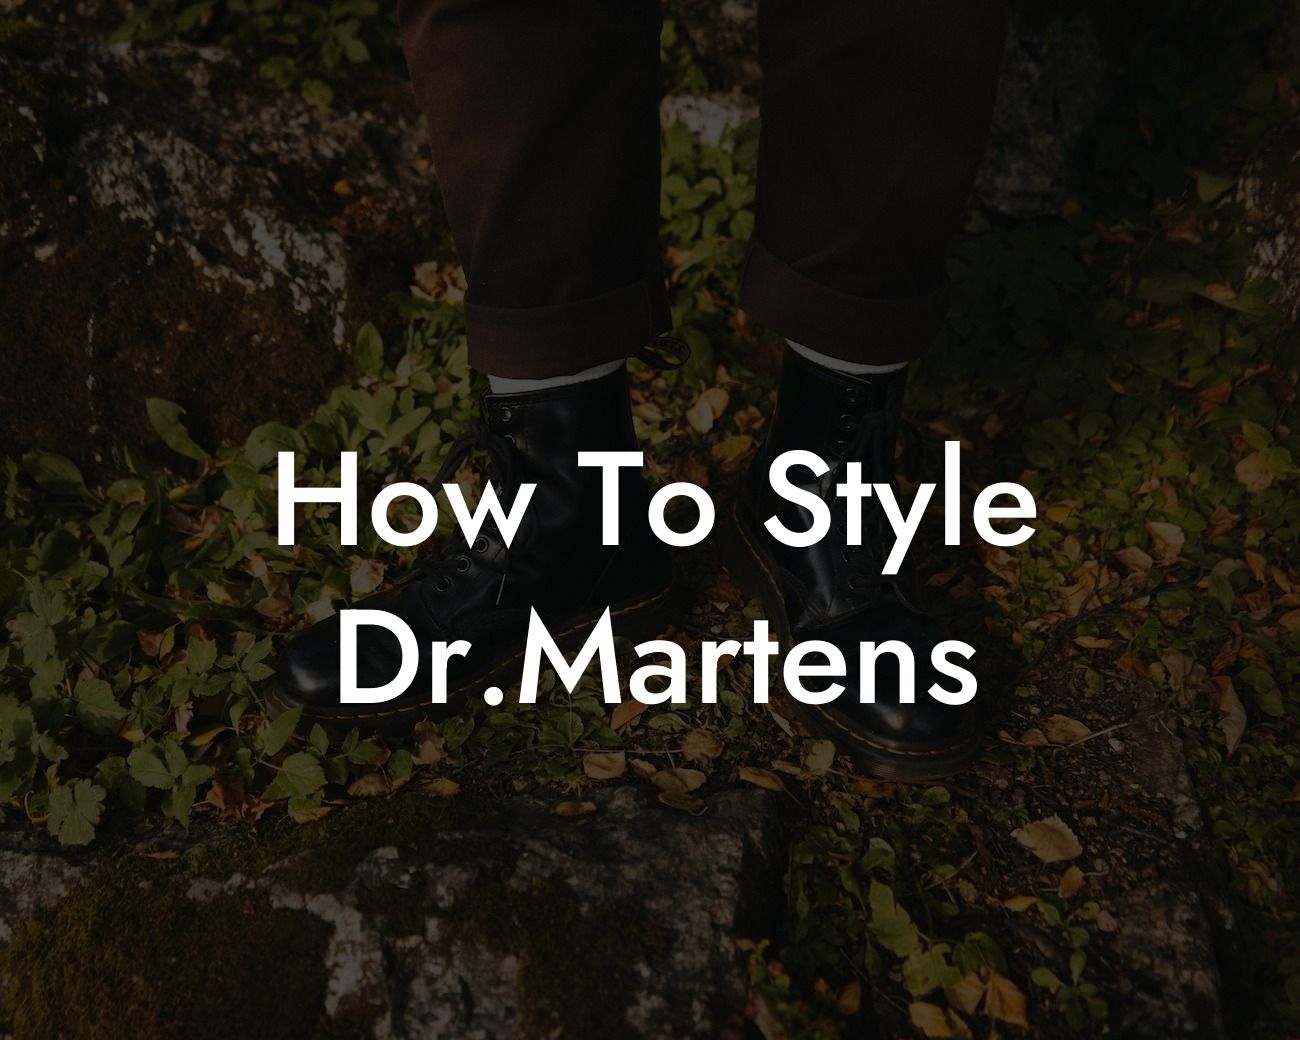 How To Style Dr.Martens